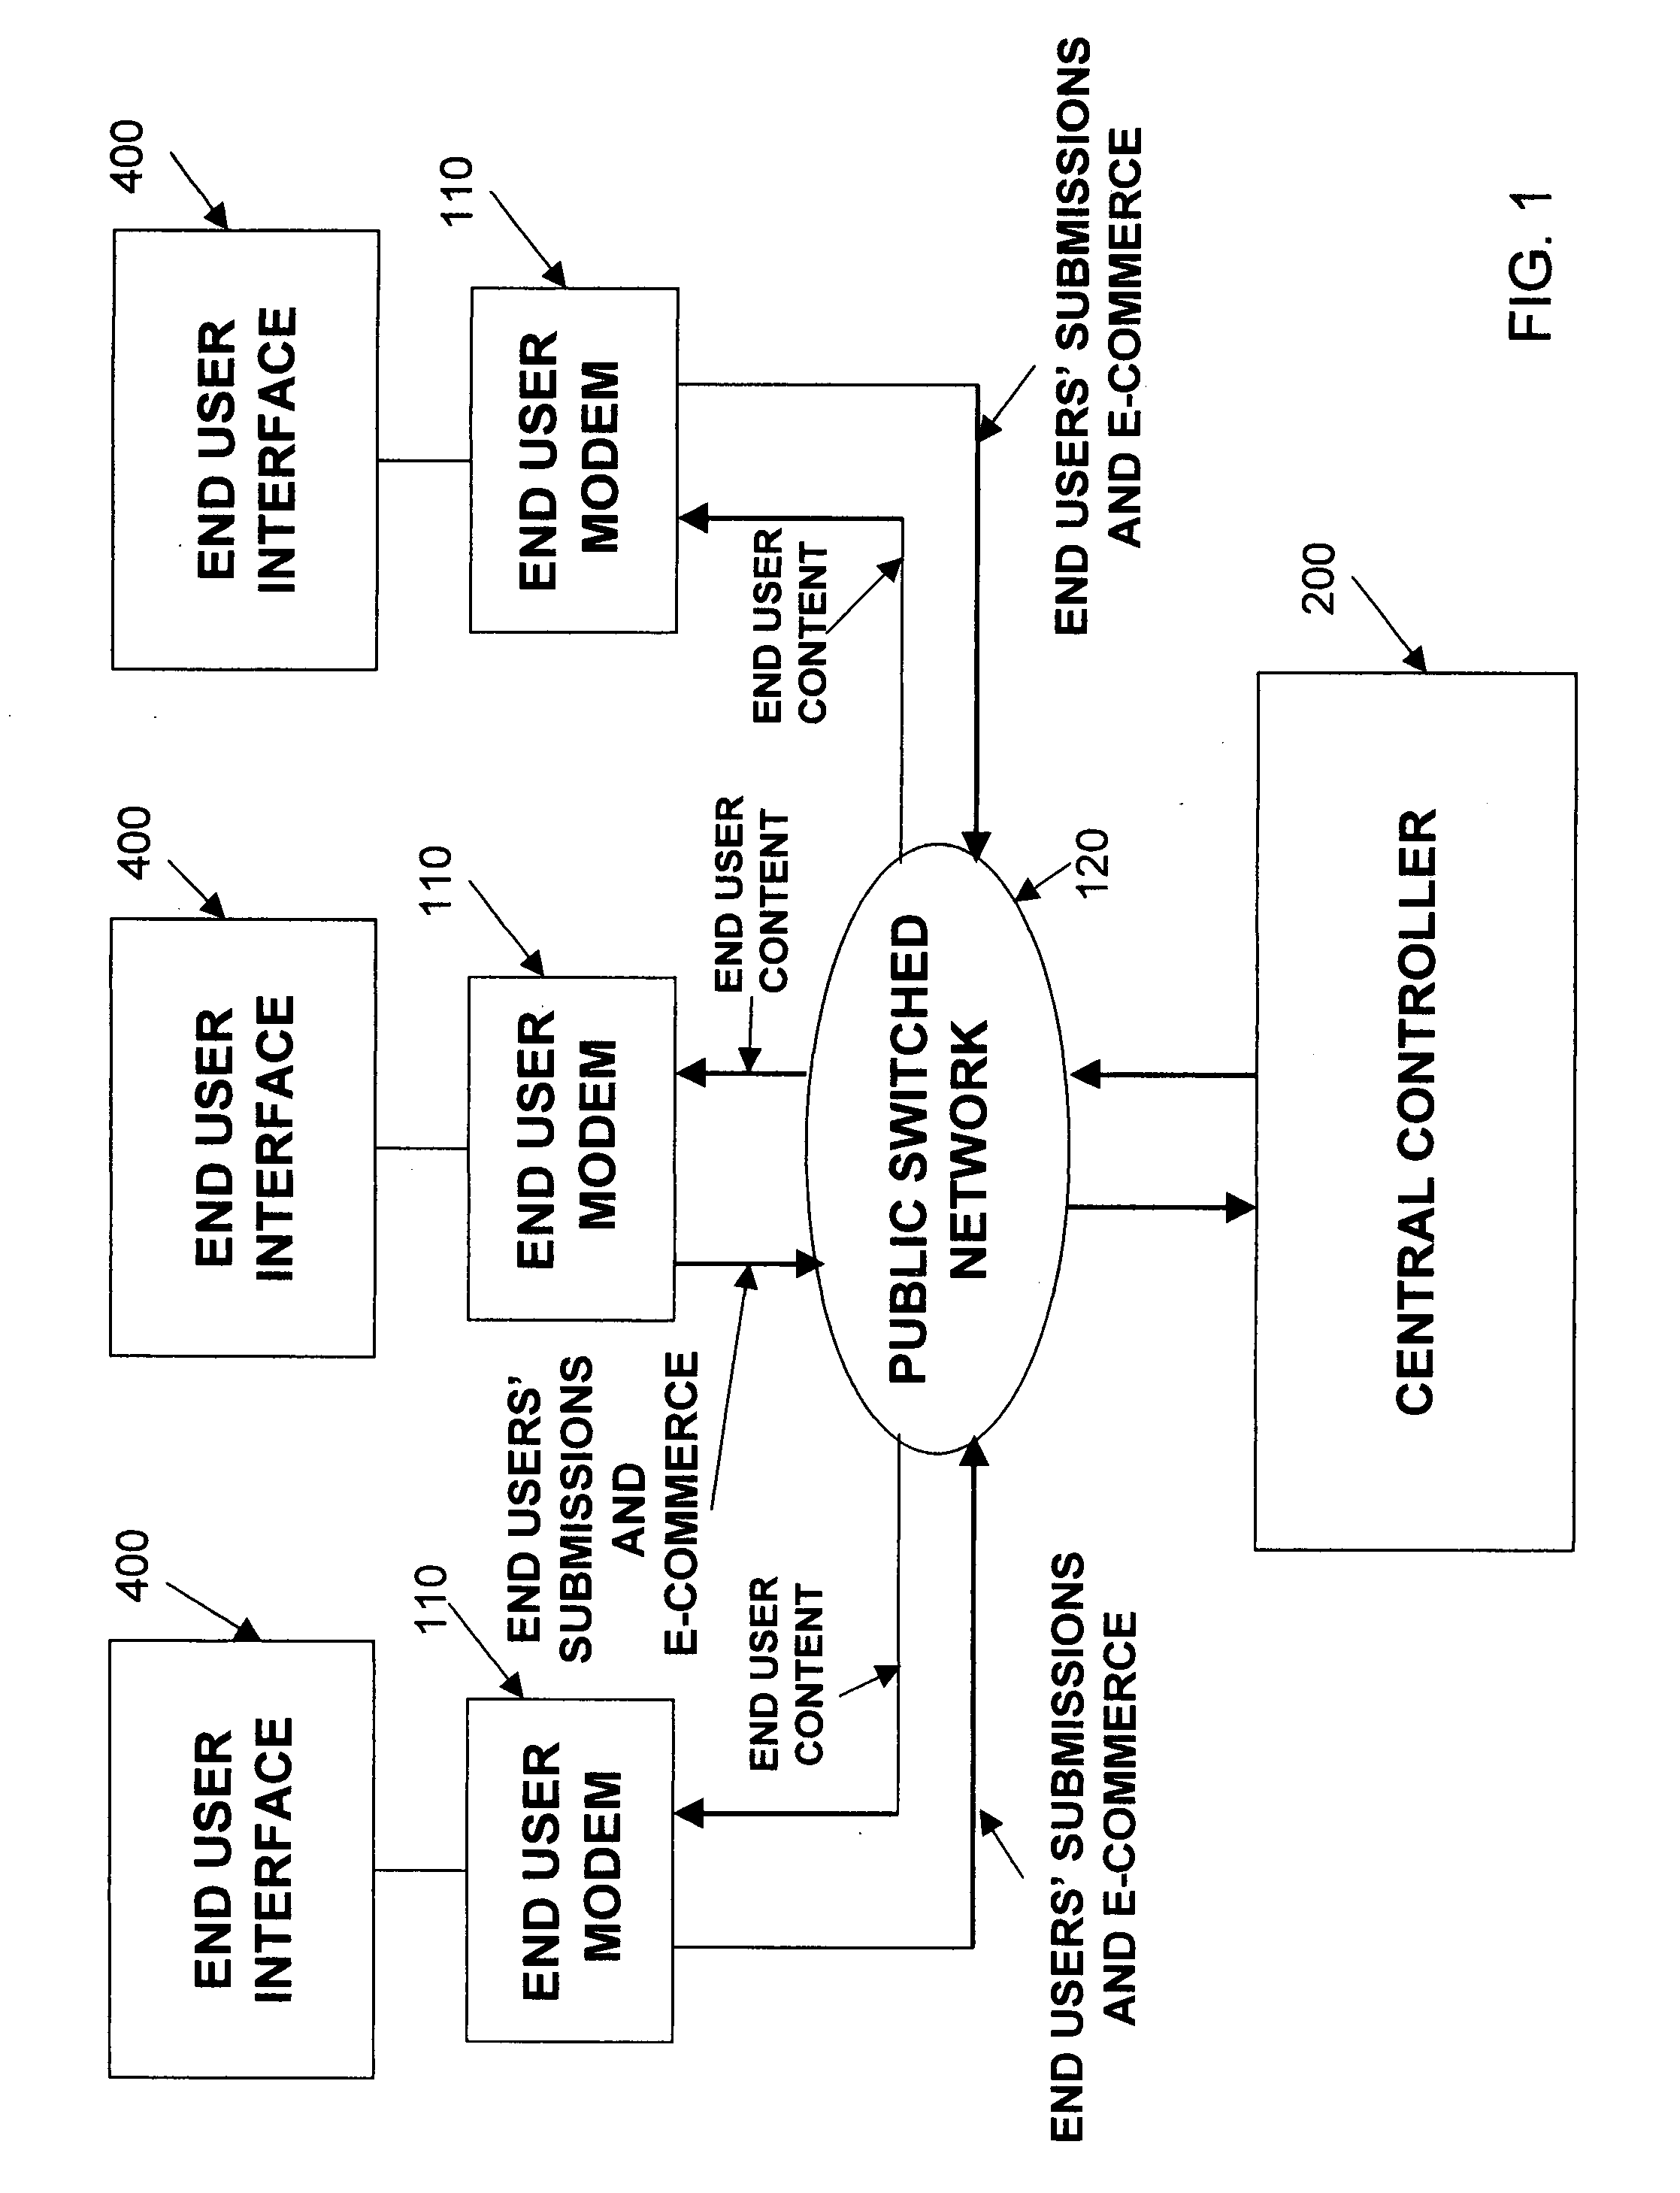 Process for creating media content based upon submissions received on an electronic multi-media exchange